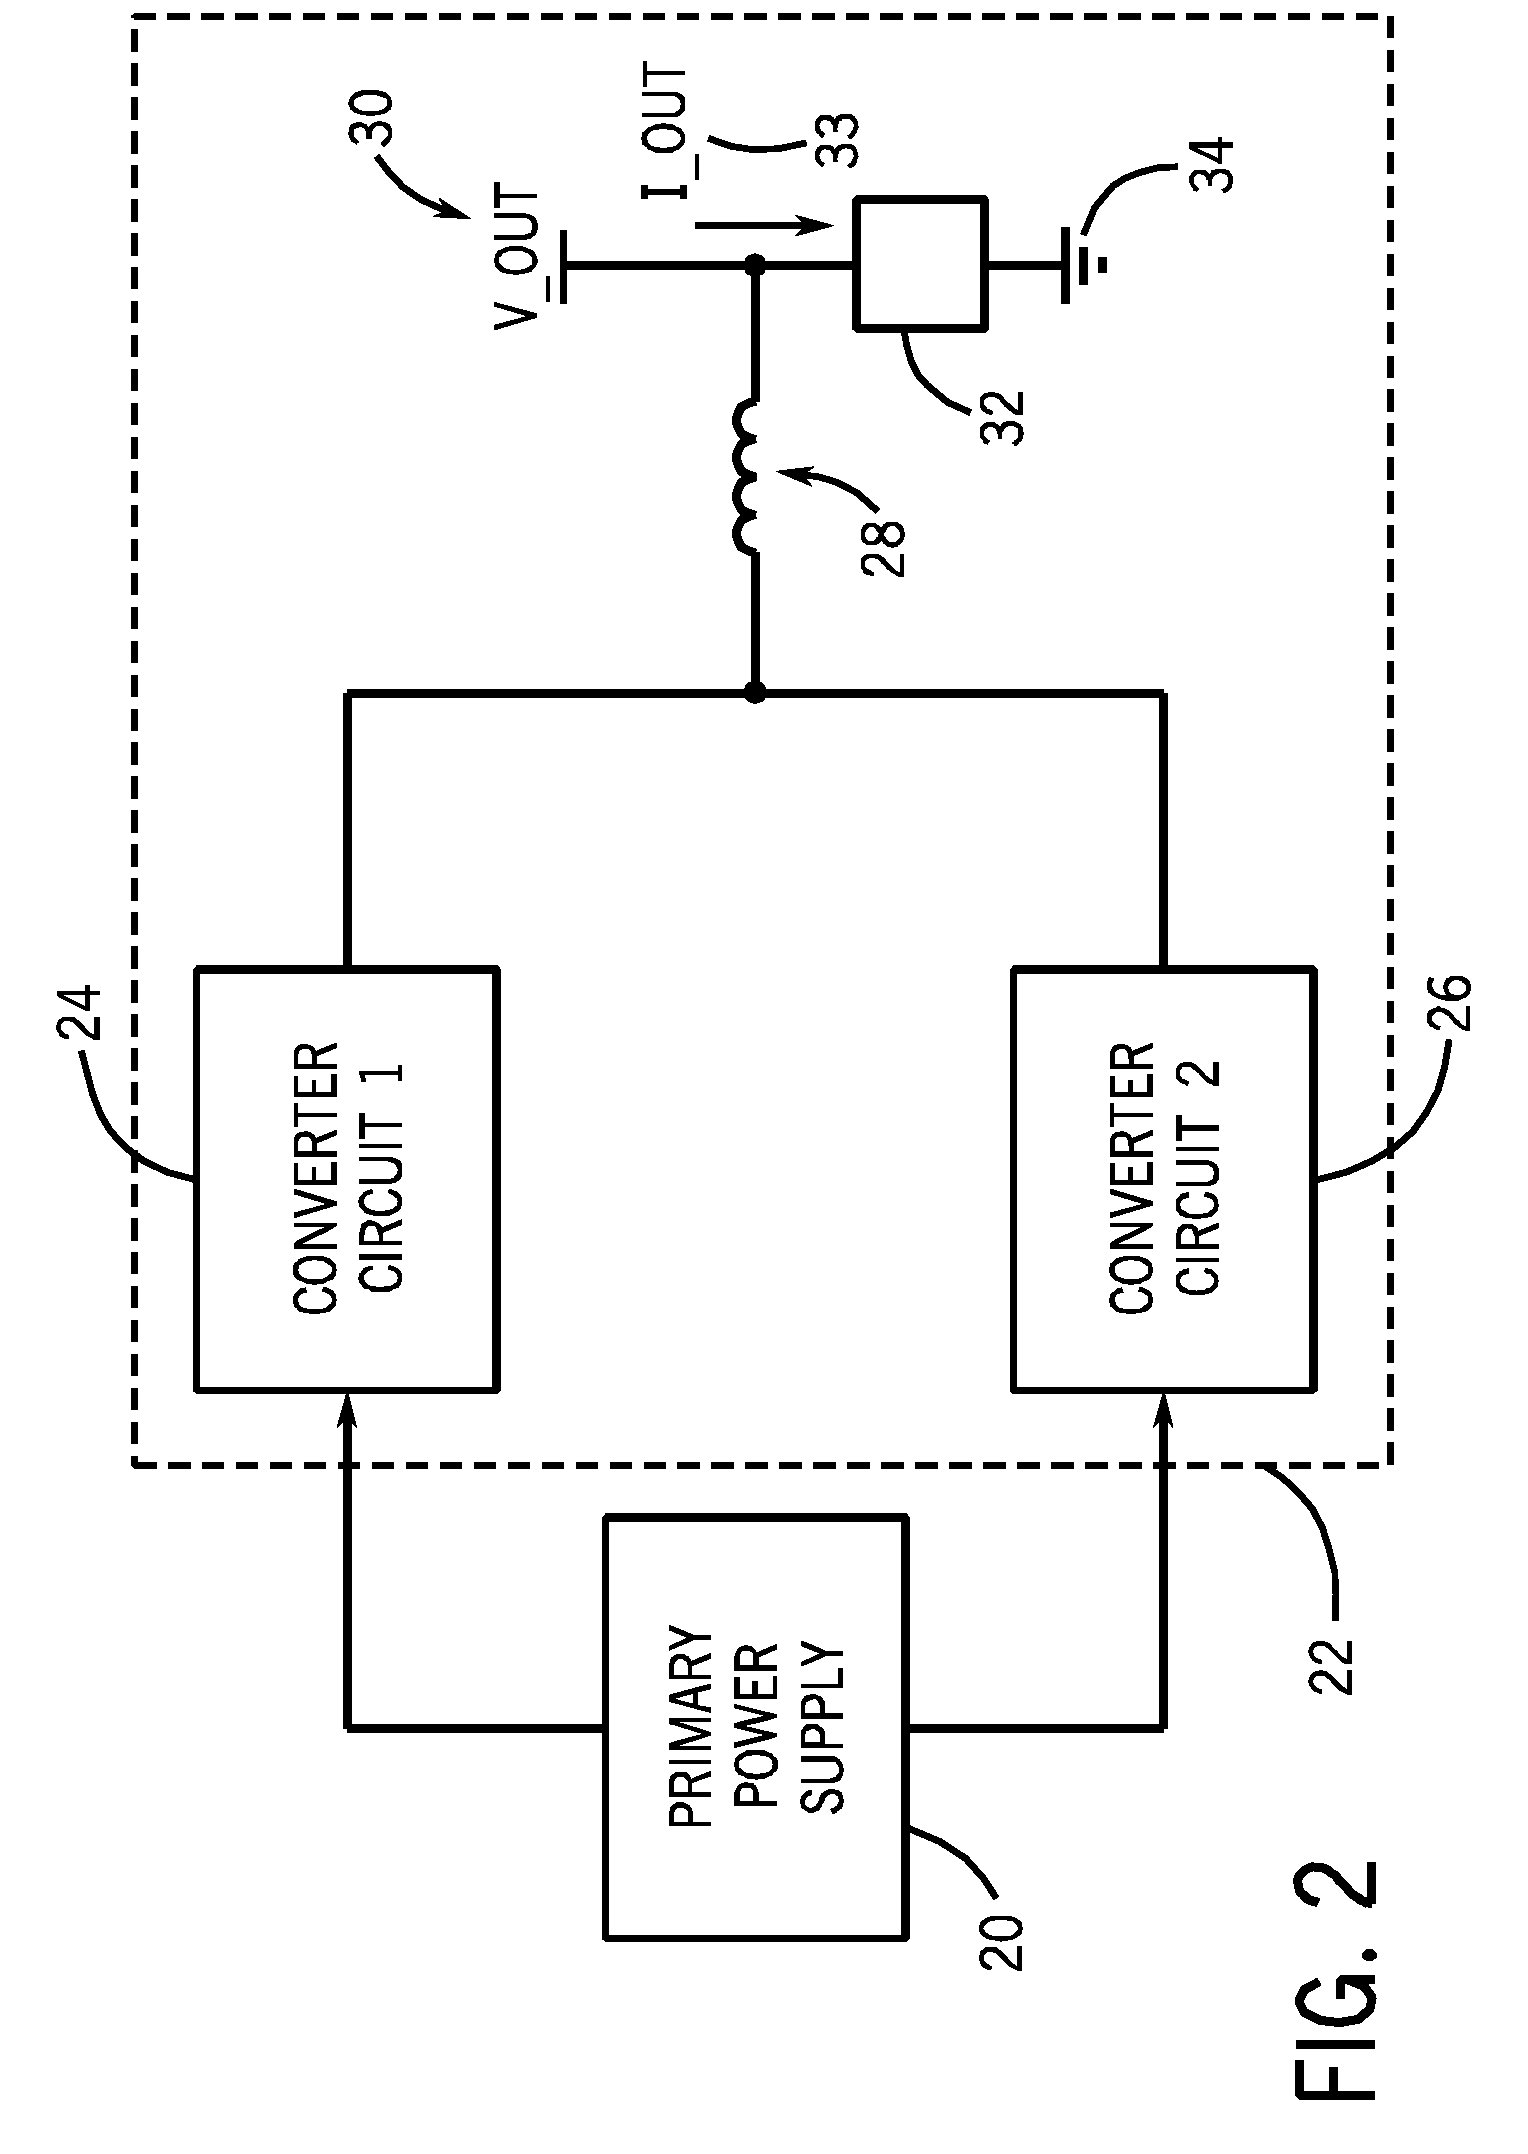 Welding or cutting power supply using phase shift double forward converter circuit (PSDF)